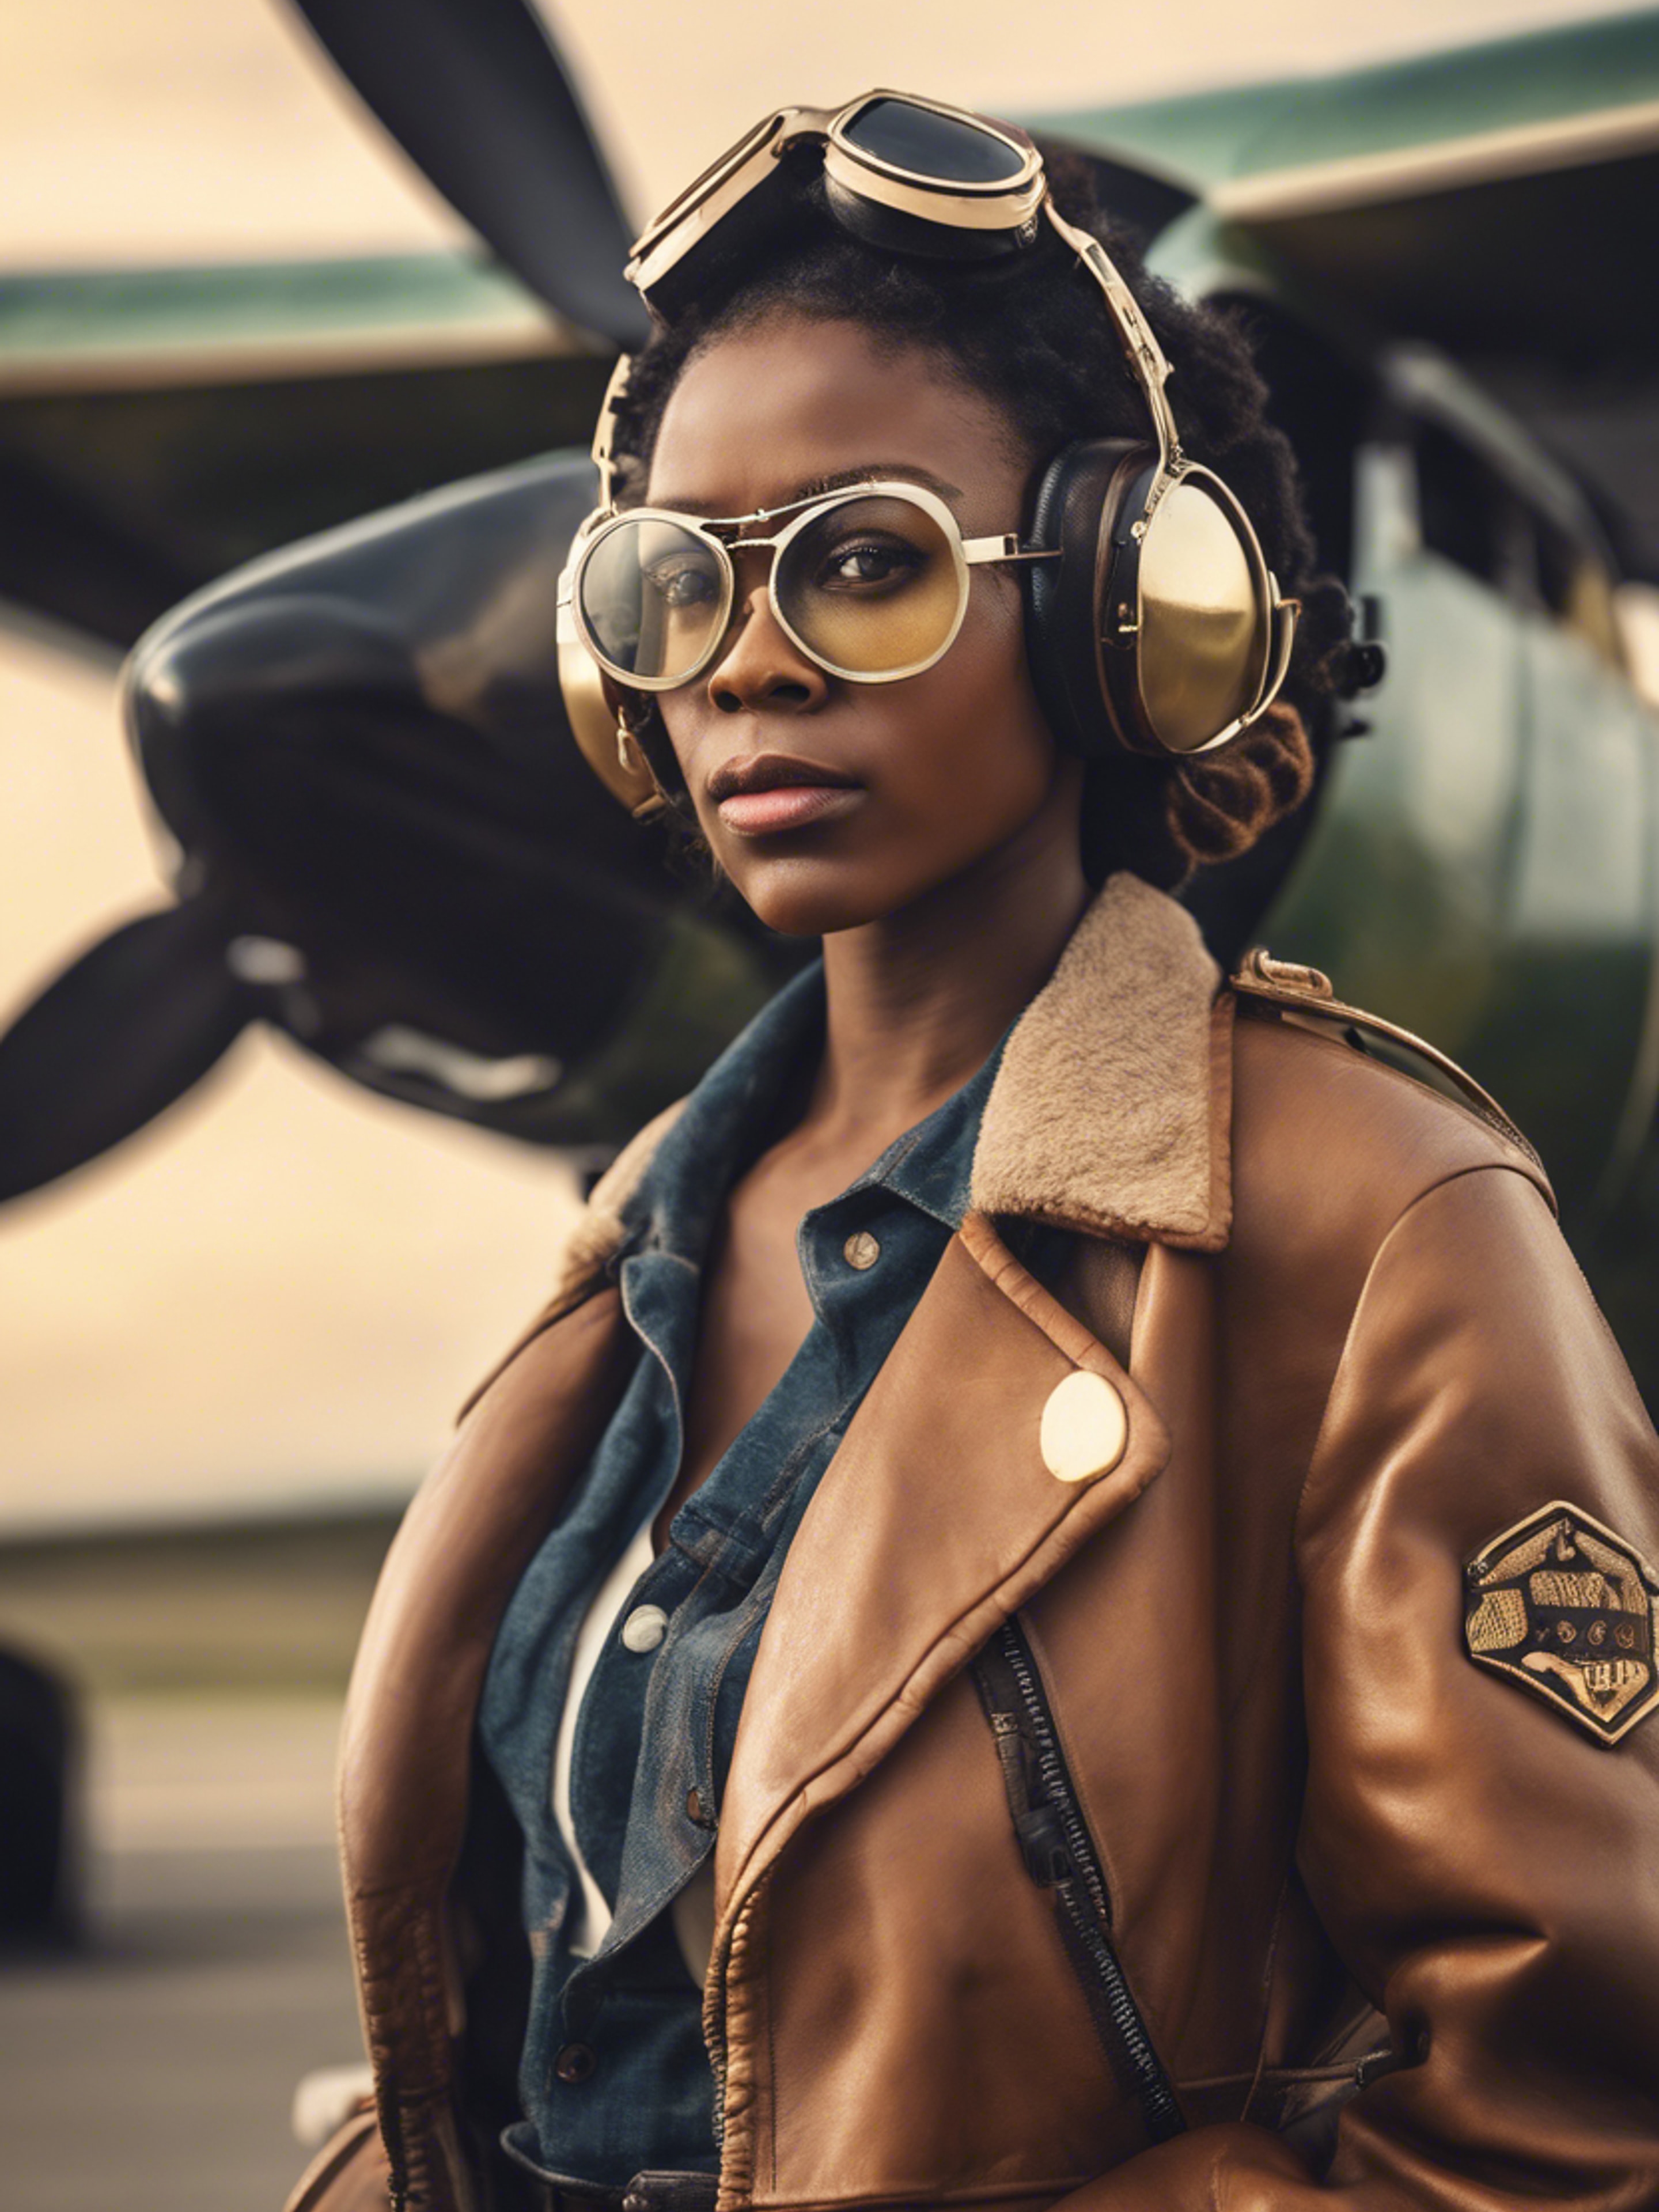 A black girl in an aviator jacket and goggles flying a retro propeller plane. Tapetai[82958076c6f747e0ac9d]